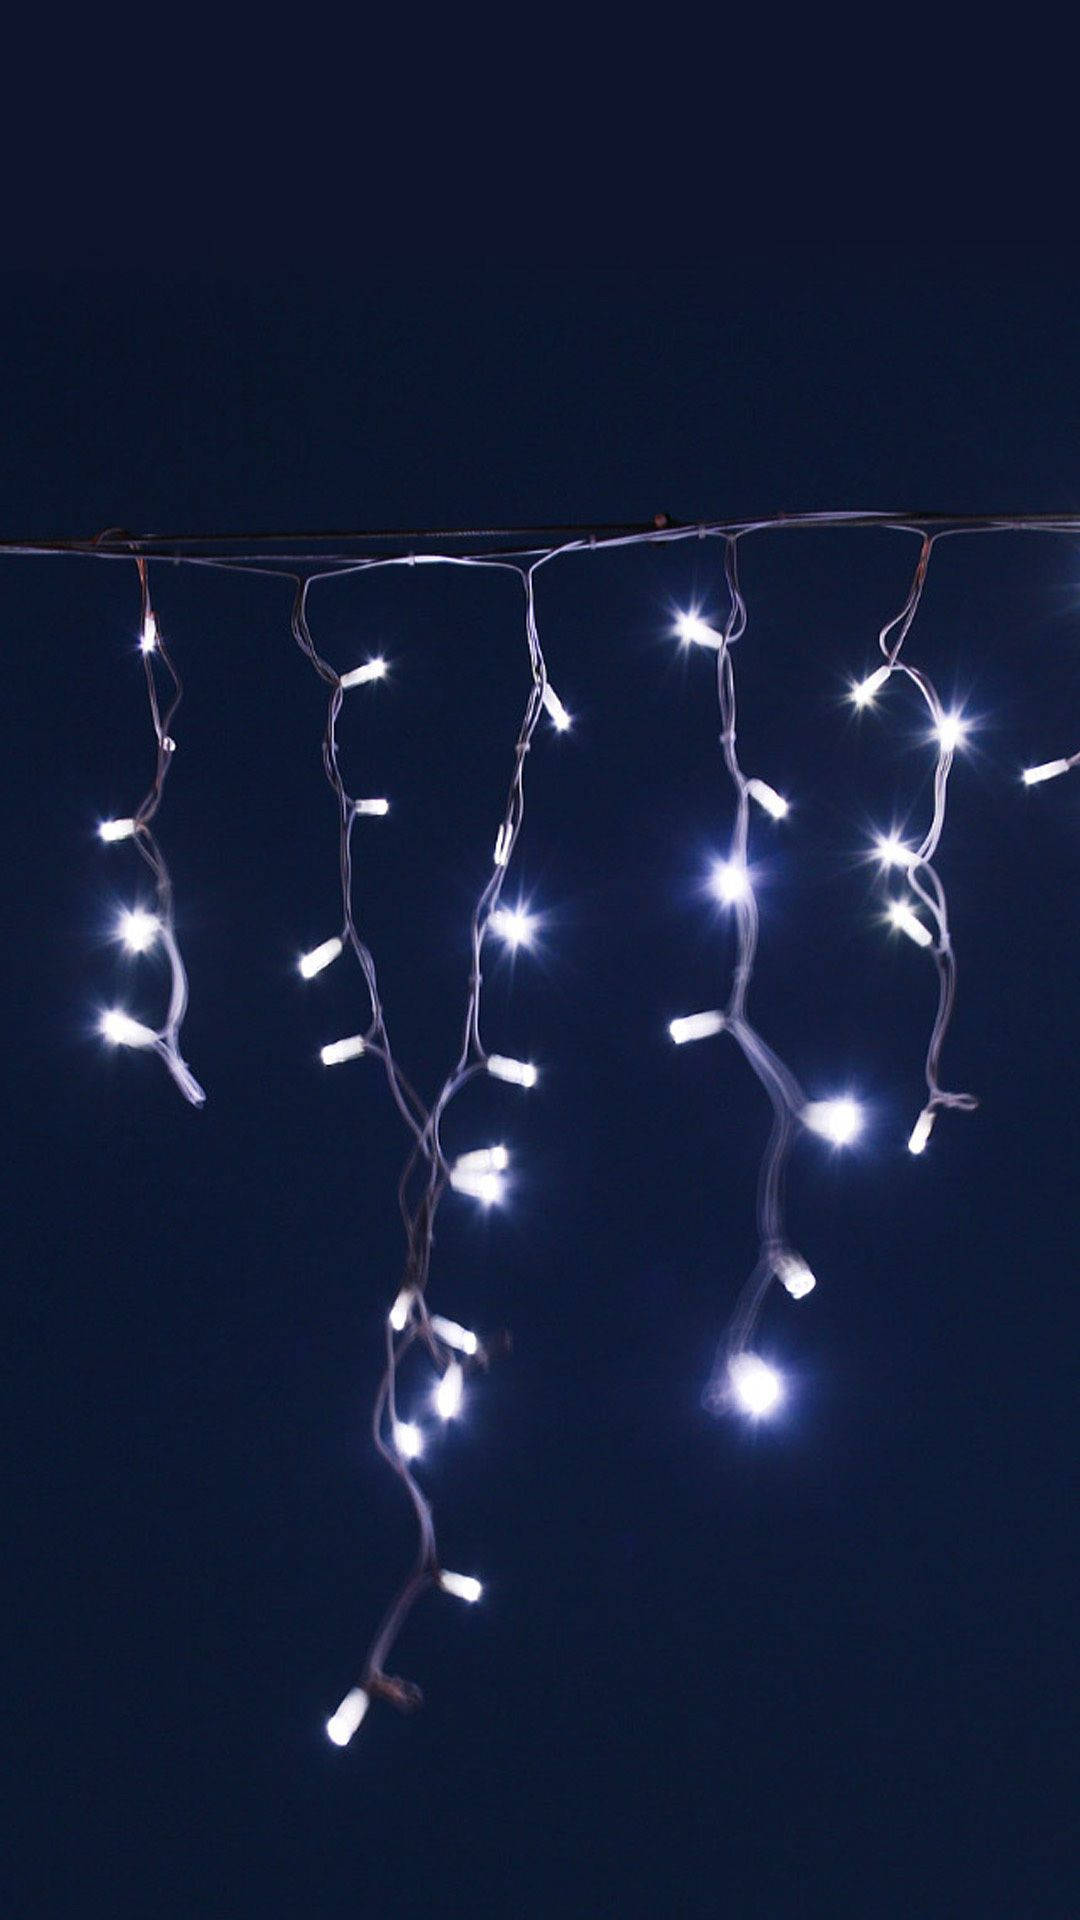 White Led String Lights Hanging From A Wire Wallpaper